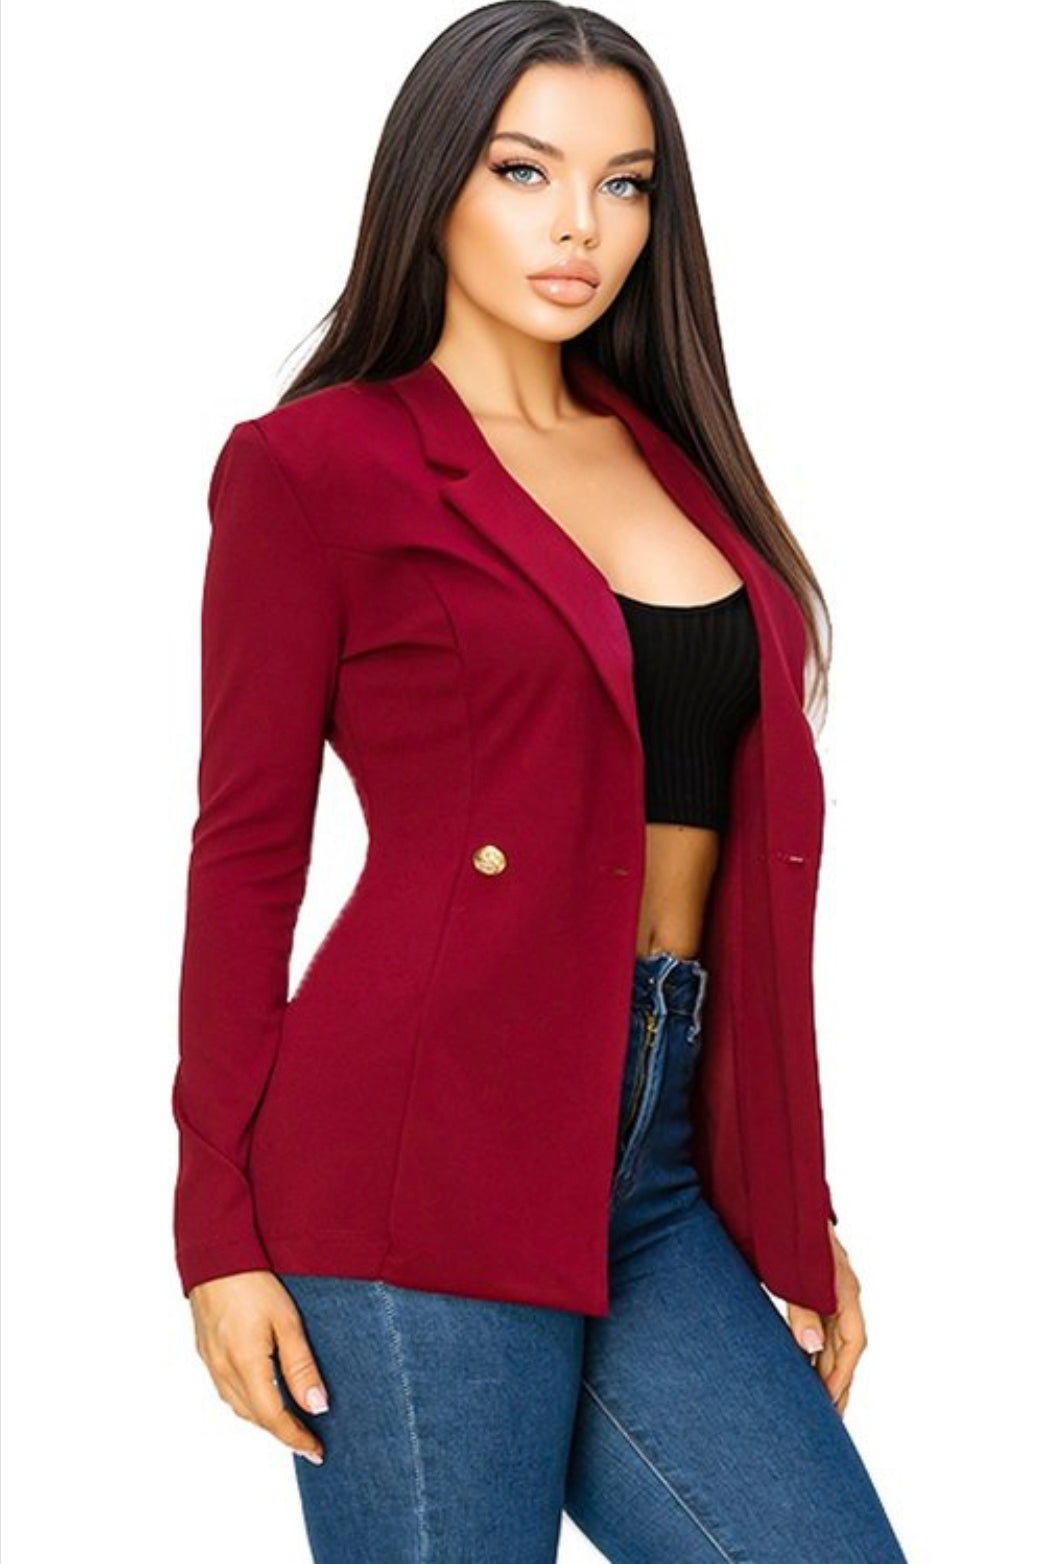 SOLID DOUBLE BREASTED BASIC BLAZER New Arrival